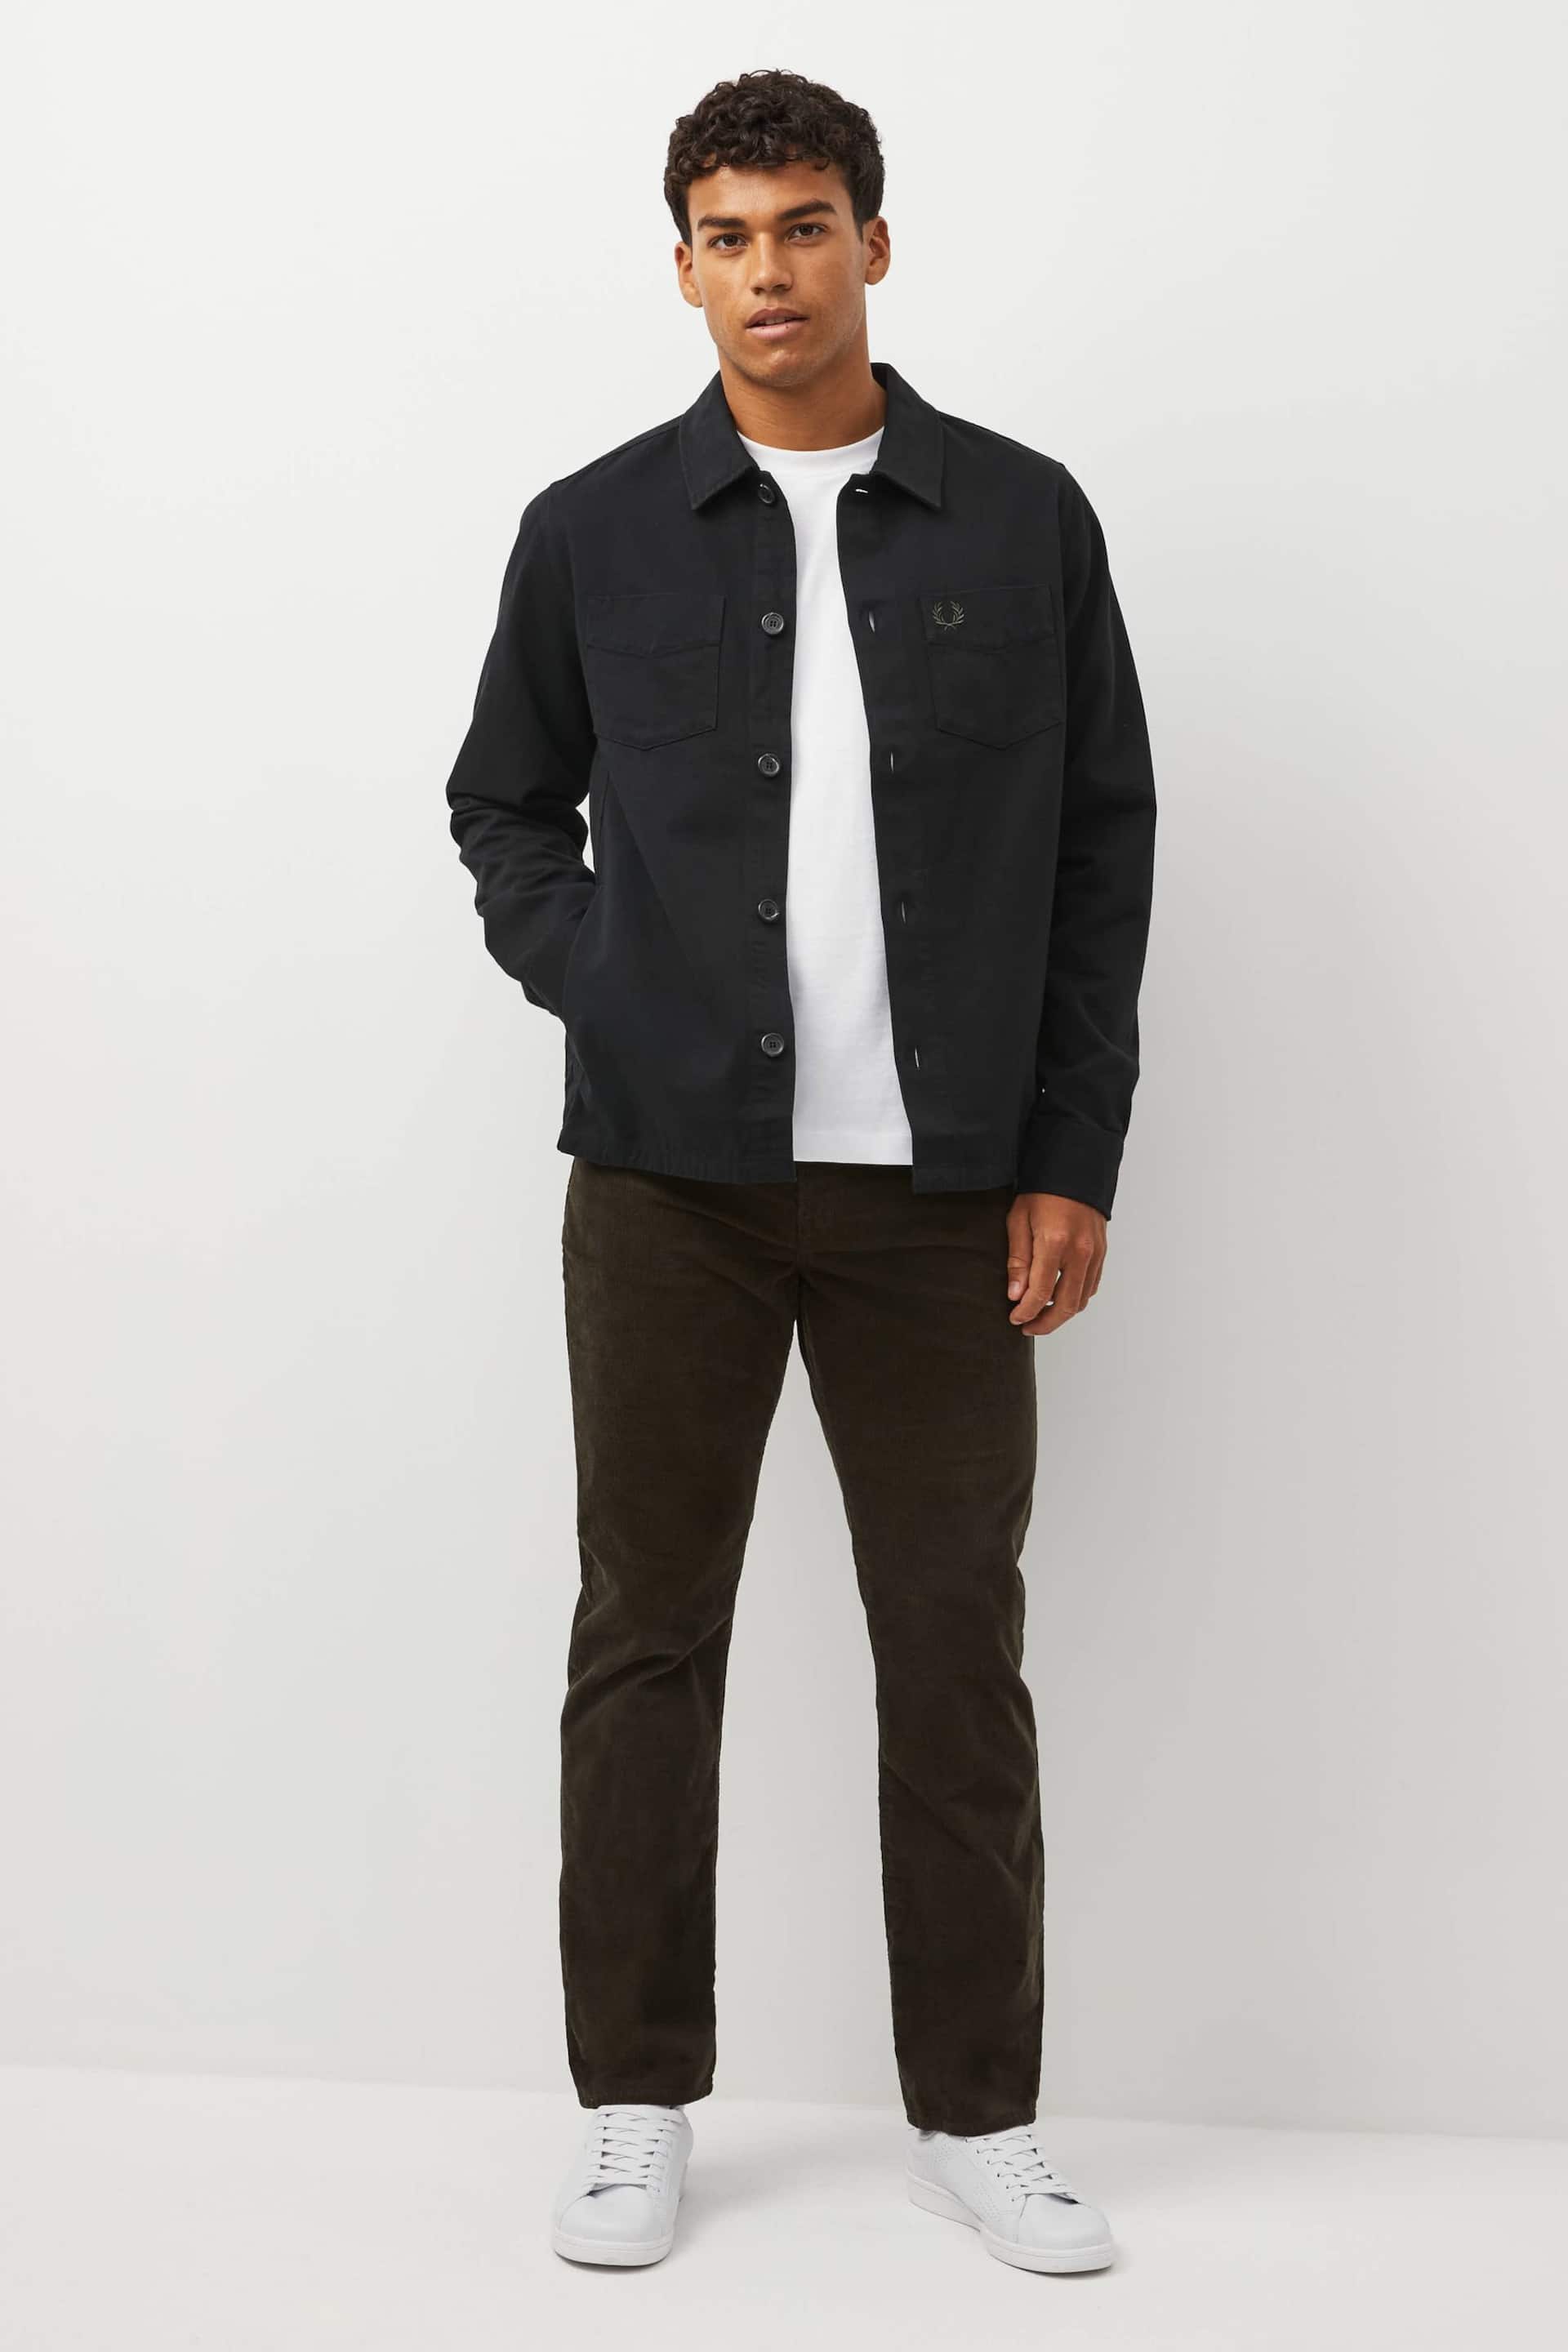 Fred Perry Black Twill Shacket Overshirt - Image 4 of 9